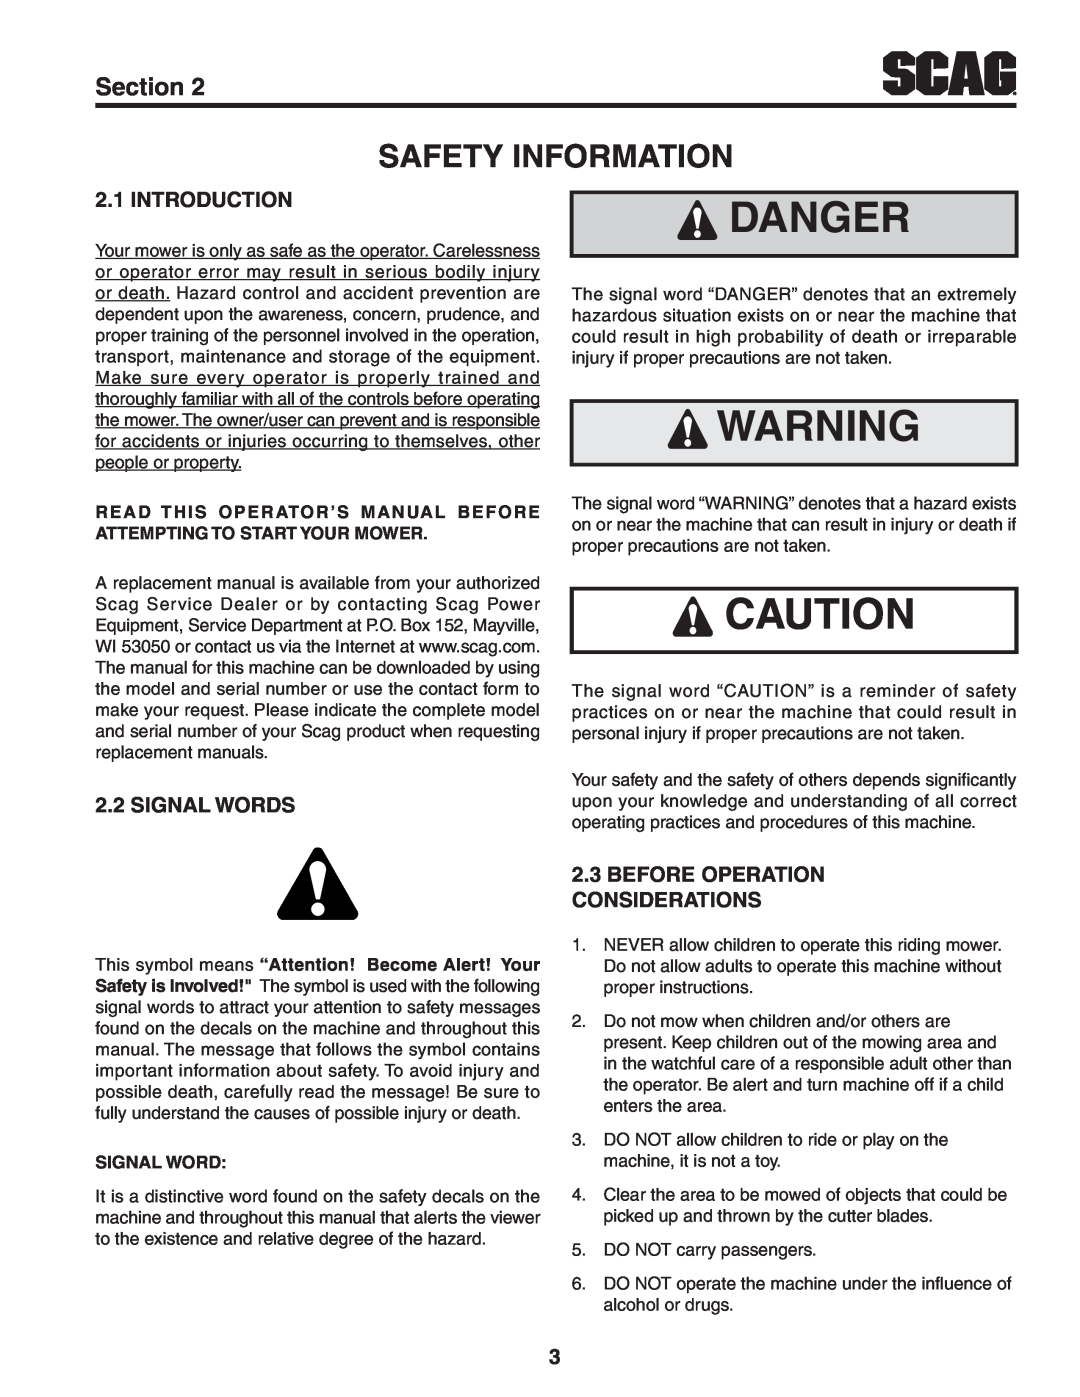 Scag Power Equipment STT-31EFI-SS Danger, Safety Information, Introduction, Signal Words, Before Operation Considerations 